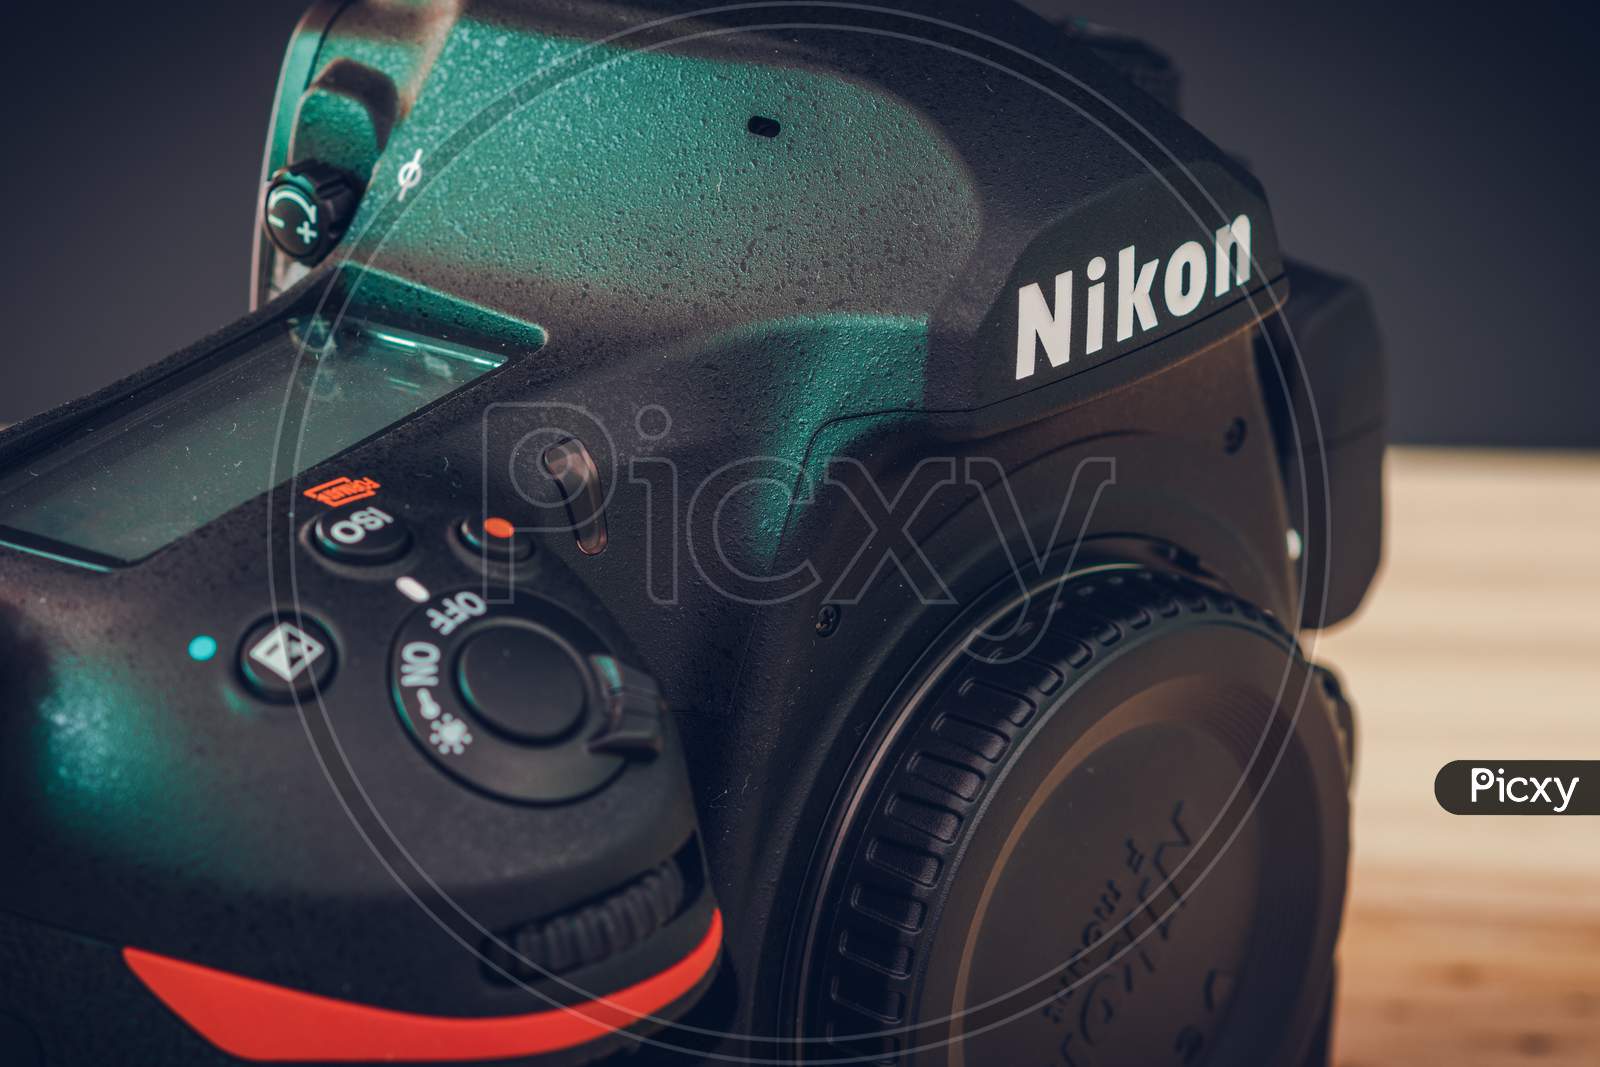 Galle, Sri Lanka - 02 17 2021: Nikon D850 Dslr Body With Camera Body Cap, Top Lcd Display, And Front Dials And On Off Switch Close Up. Modern Professional Camera Body On A Wooden Table View From Top.